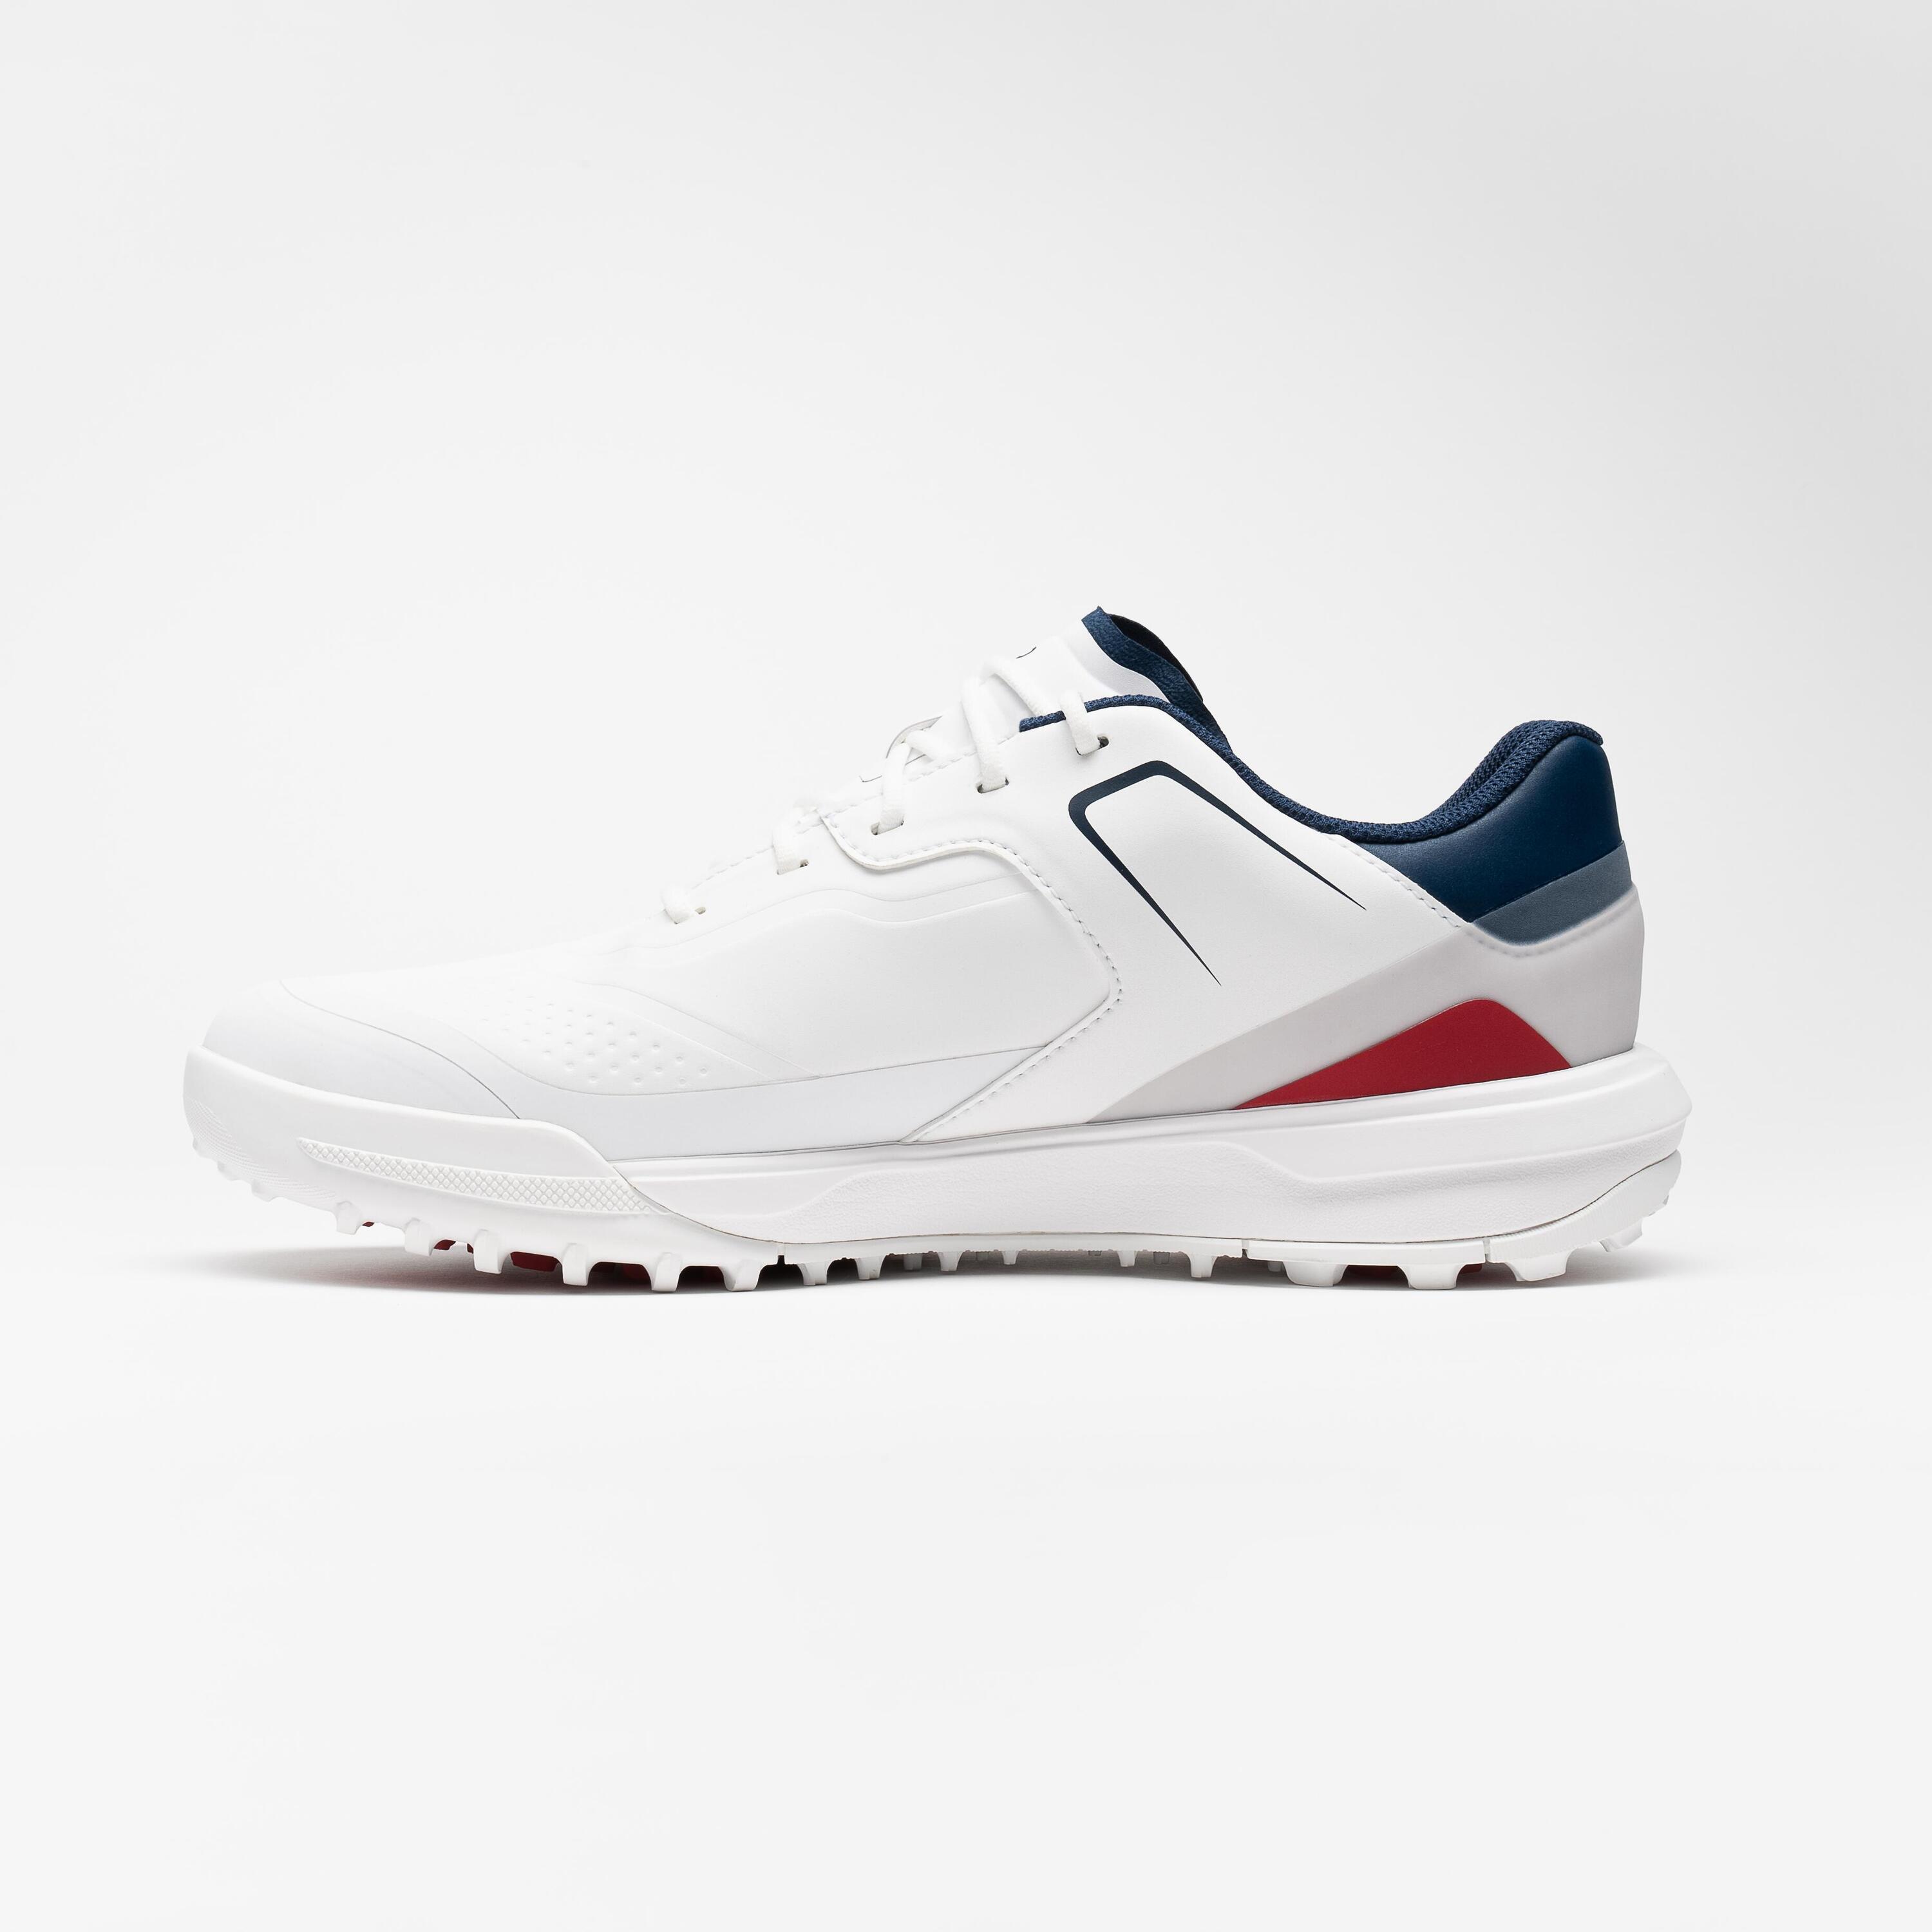 Men's golf waterproof shoes - MW 500 white and grey 2/7